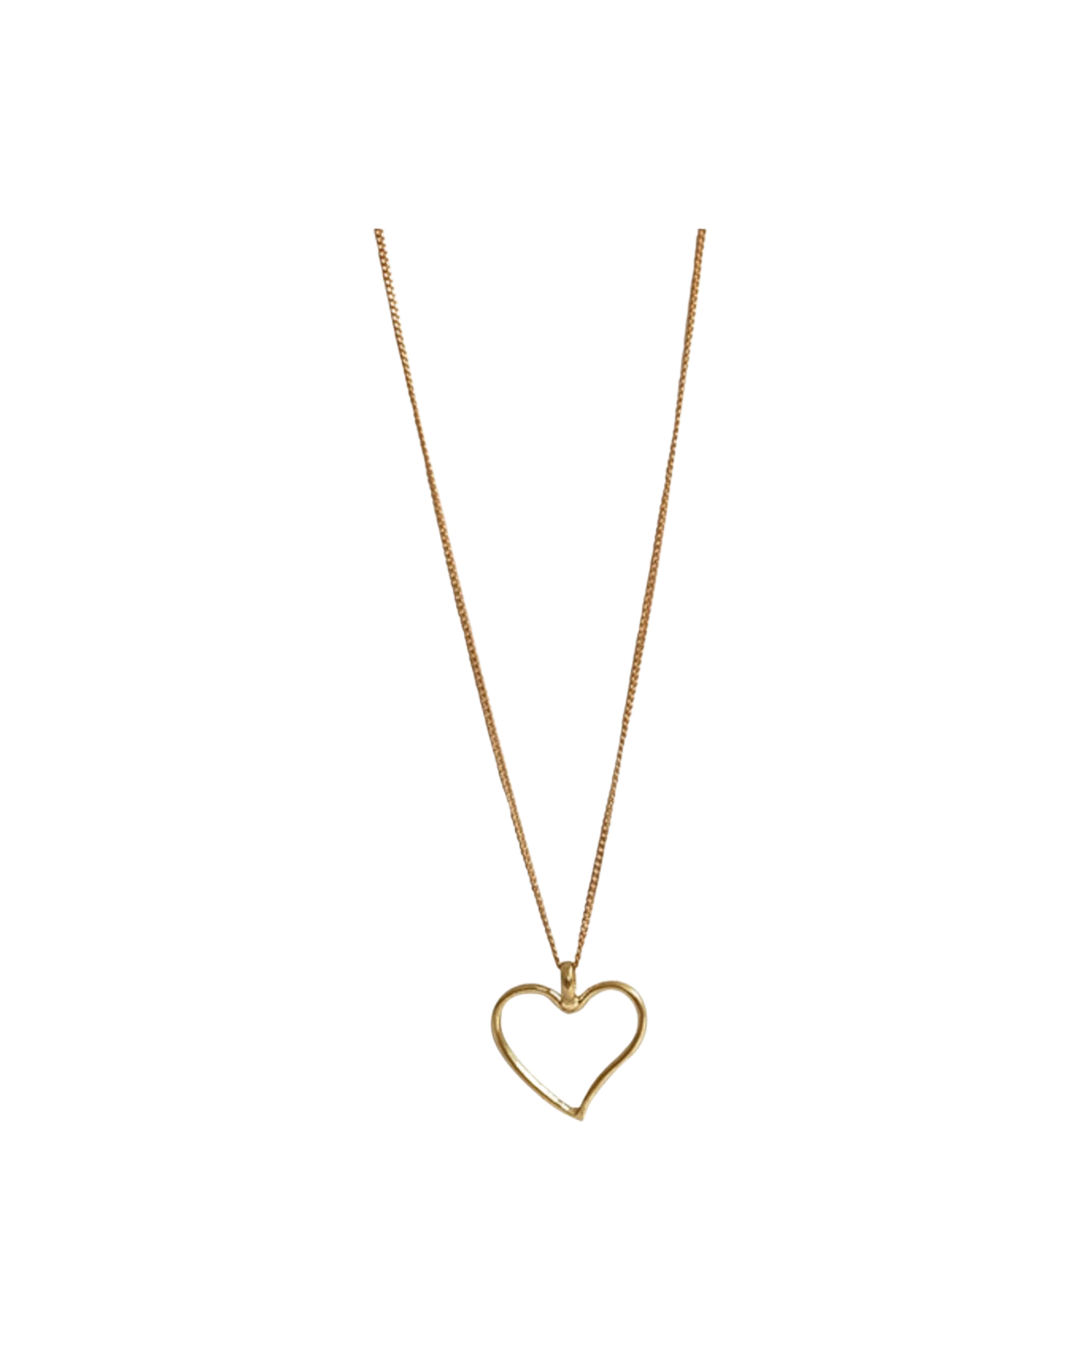 NB Heart Necklace